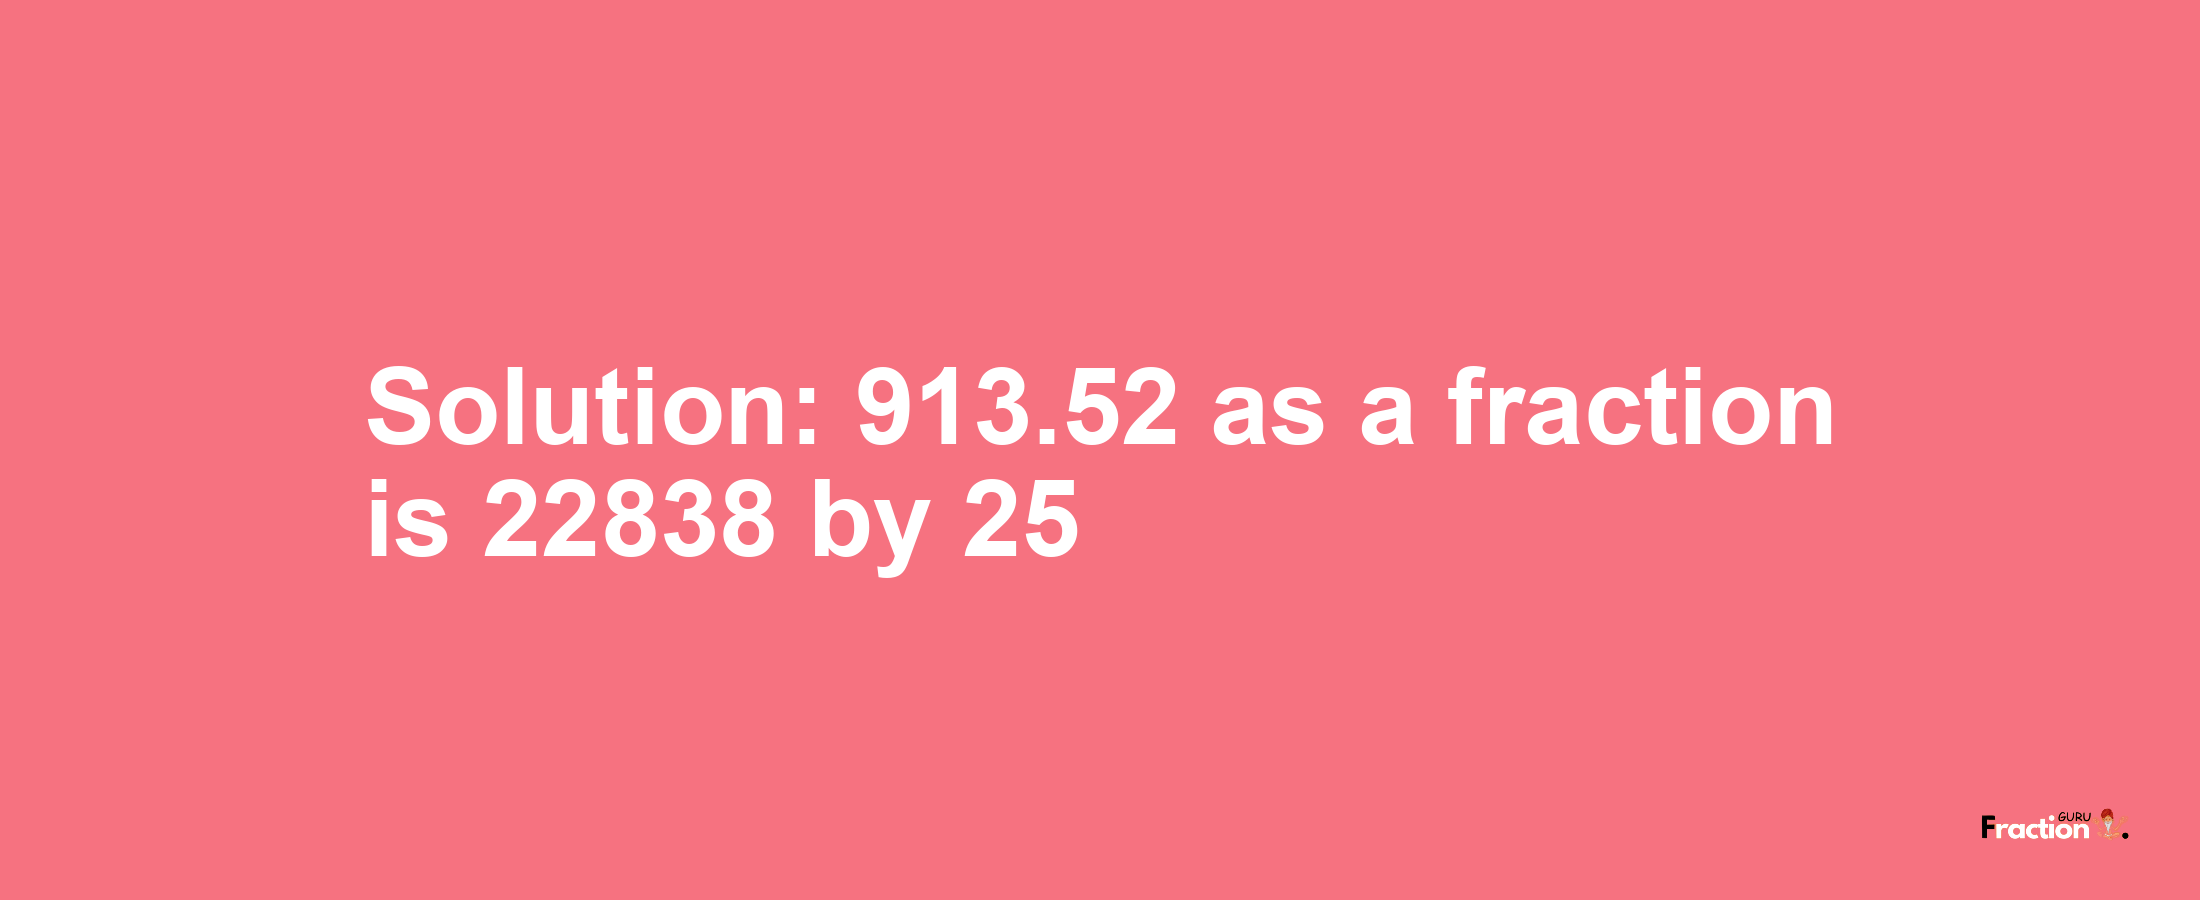 Solution:913.52 as a fraction is 22838/25